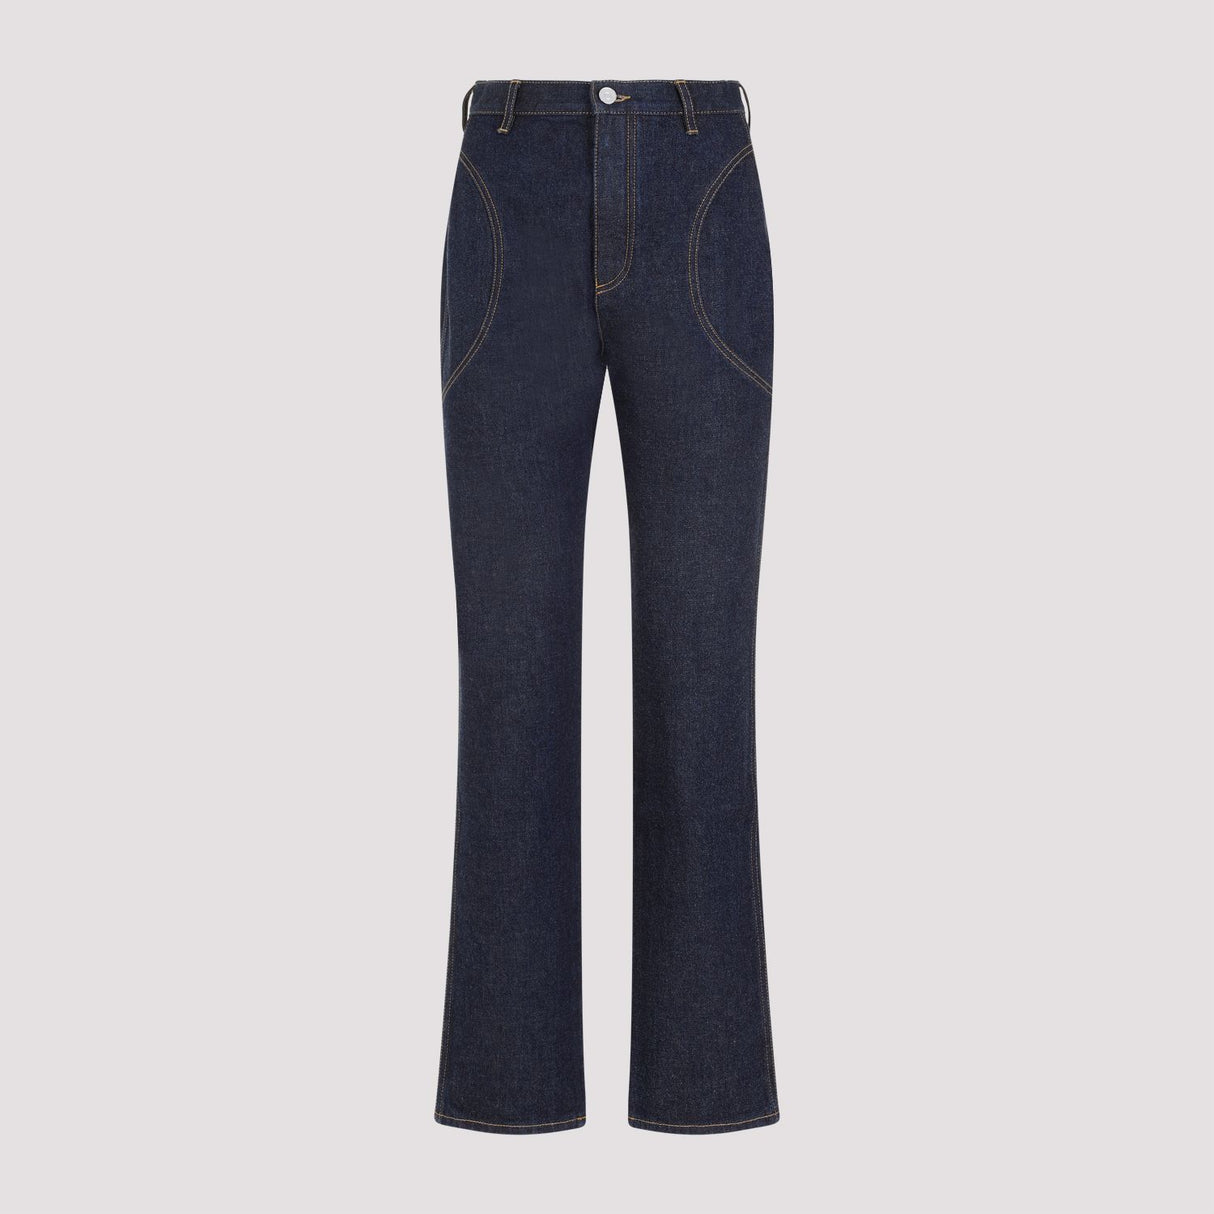 ALAIA High Waist Blue Cotton Pants for Women - Stylish and Comfortable